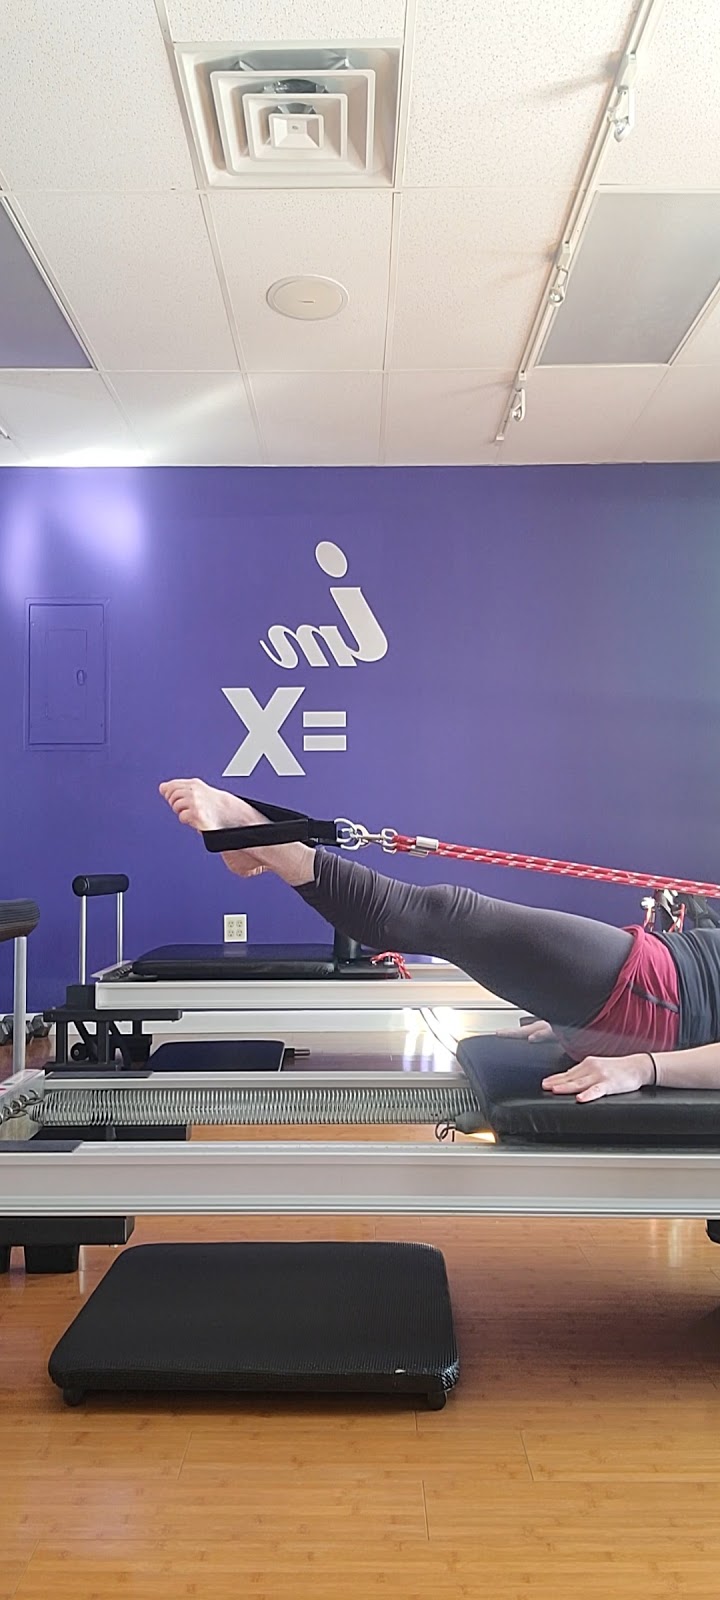 IM=X Pilates and Fitness | 1425 Broad St #4, Clifton, NJ 07013 | Phone: (732) 705-7160